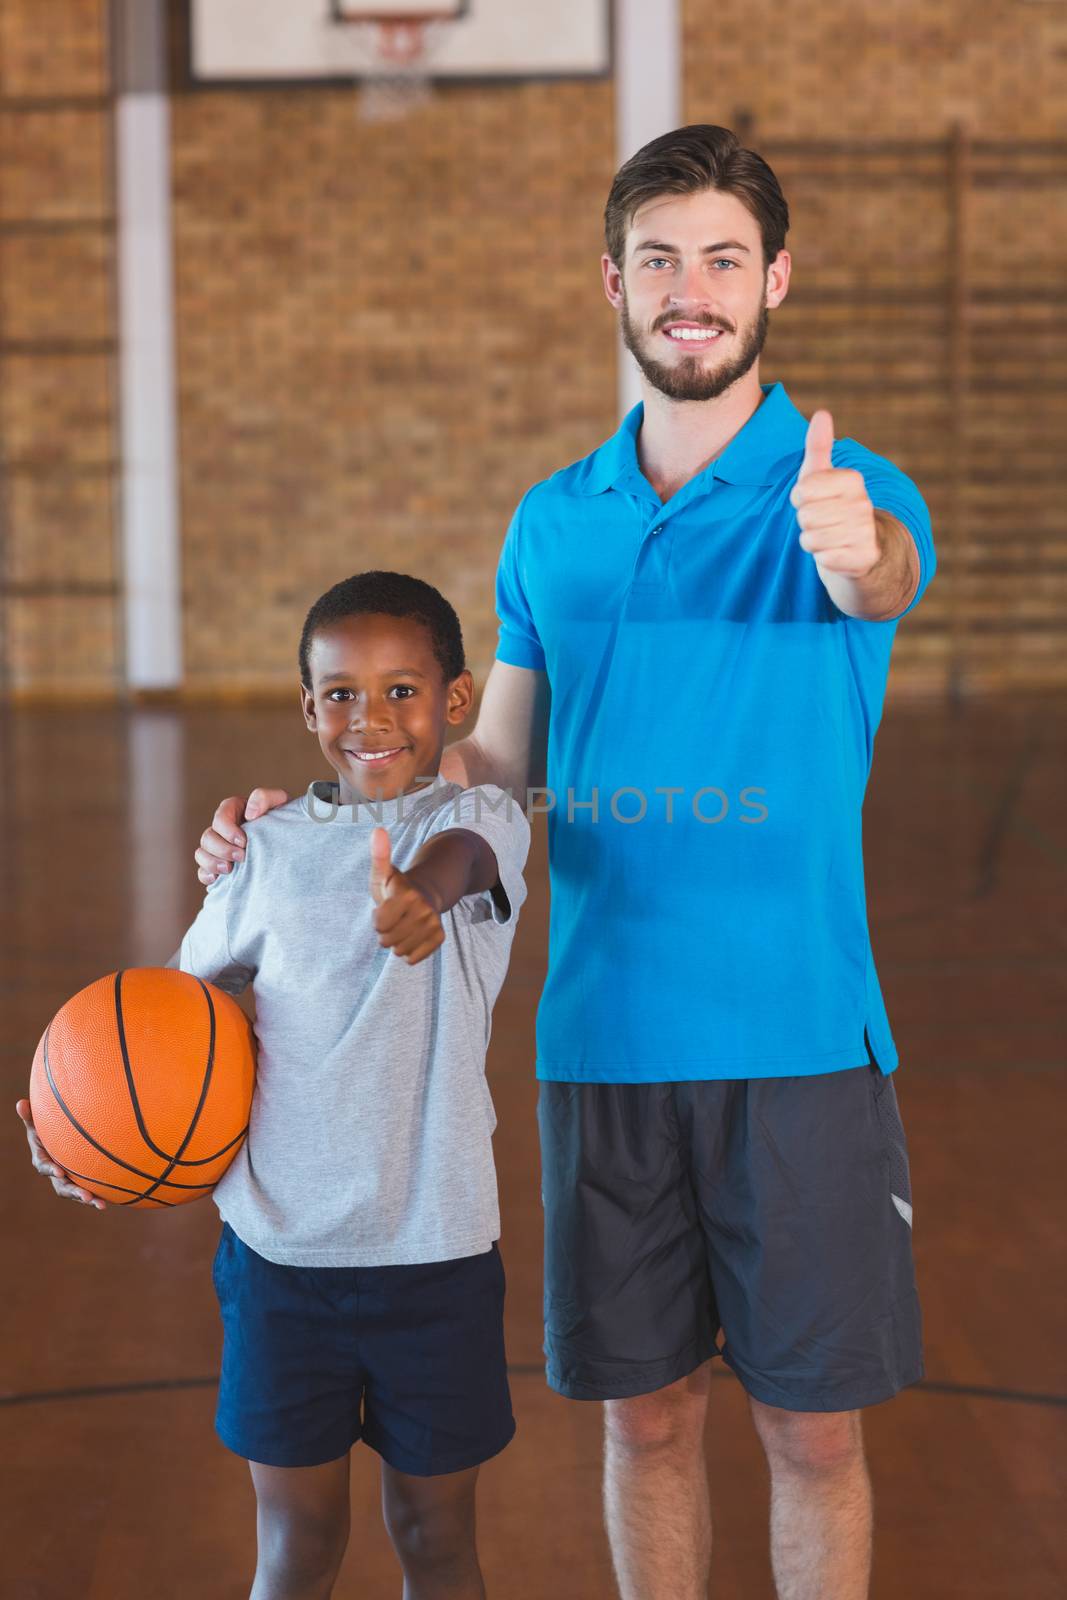 Portrait of sports teacher and schoolboy showing thumbs up in basketball court at school gym